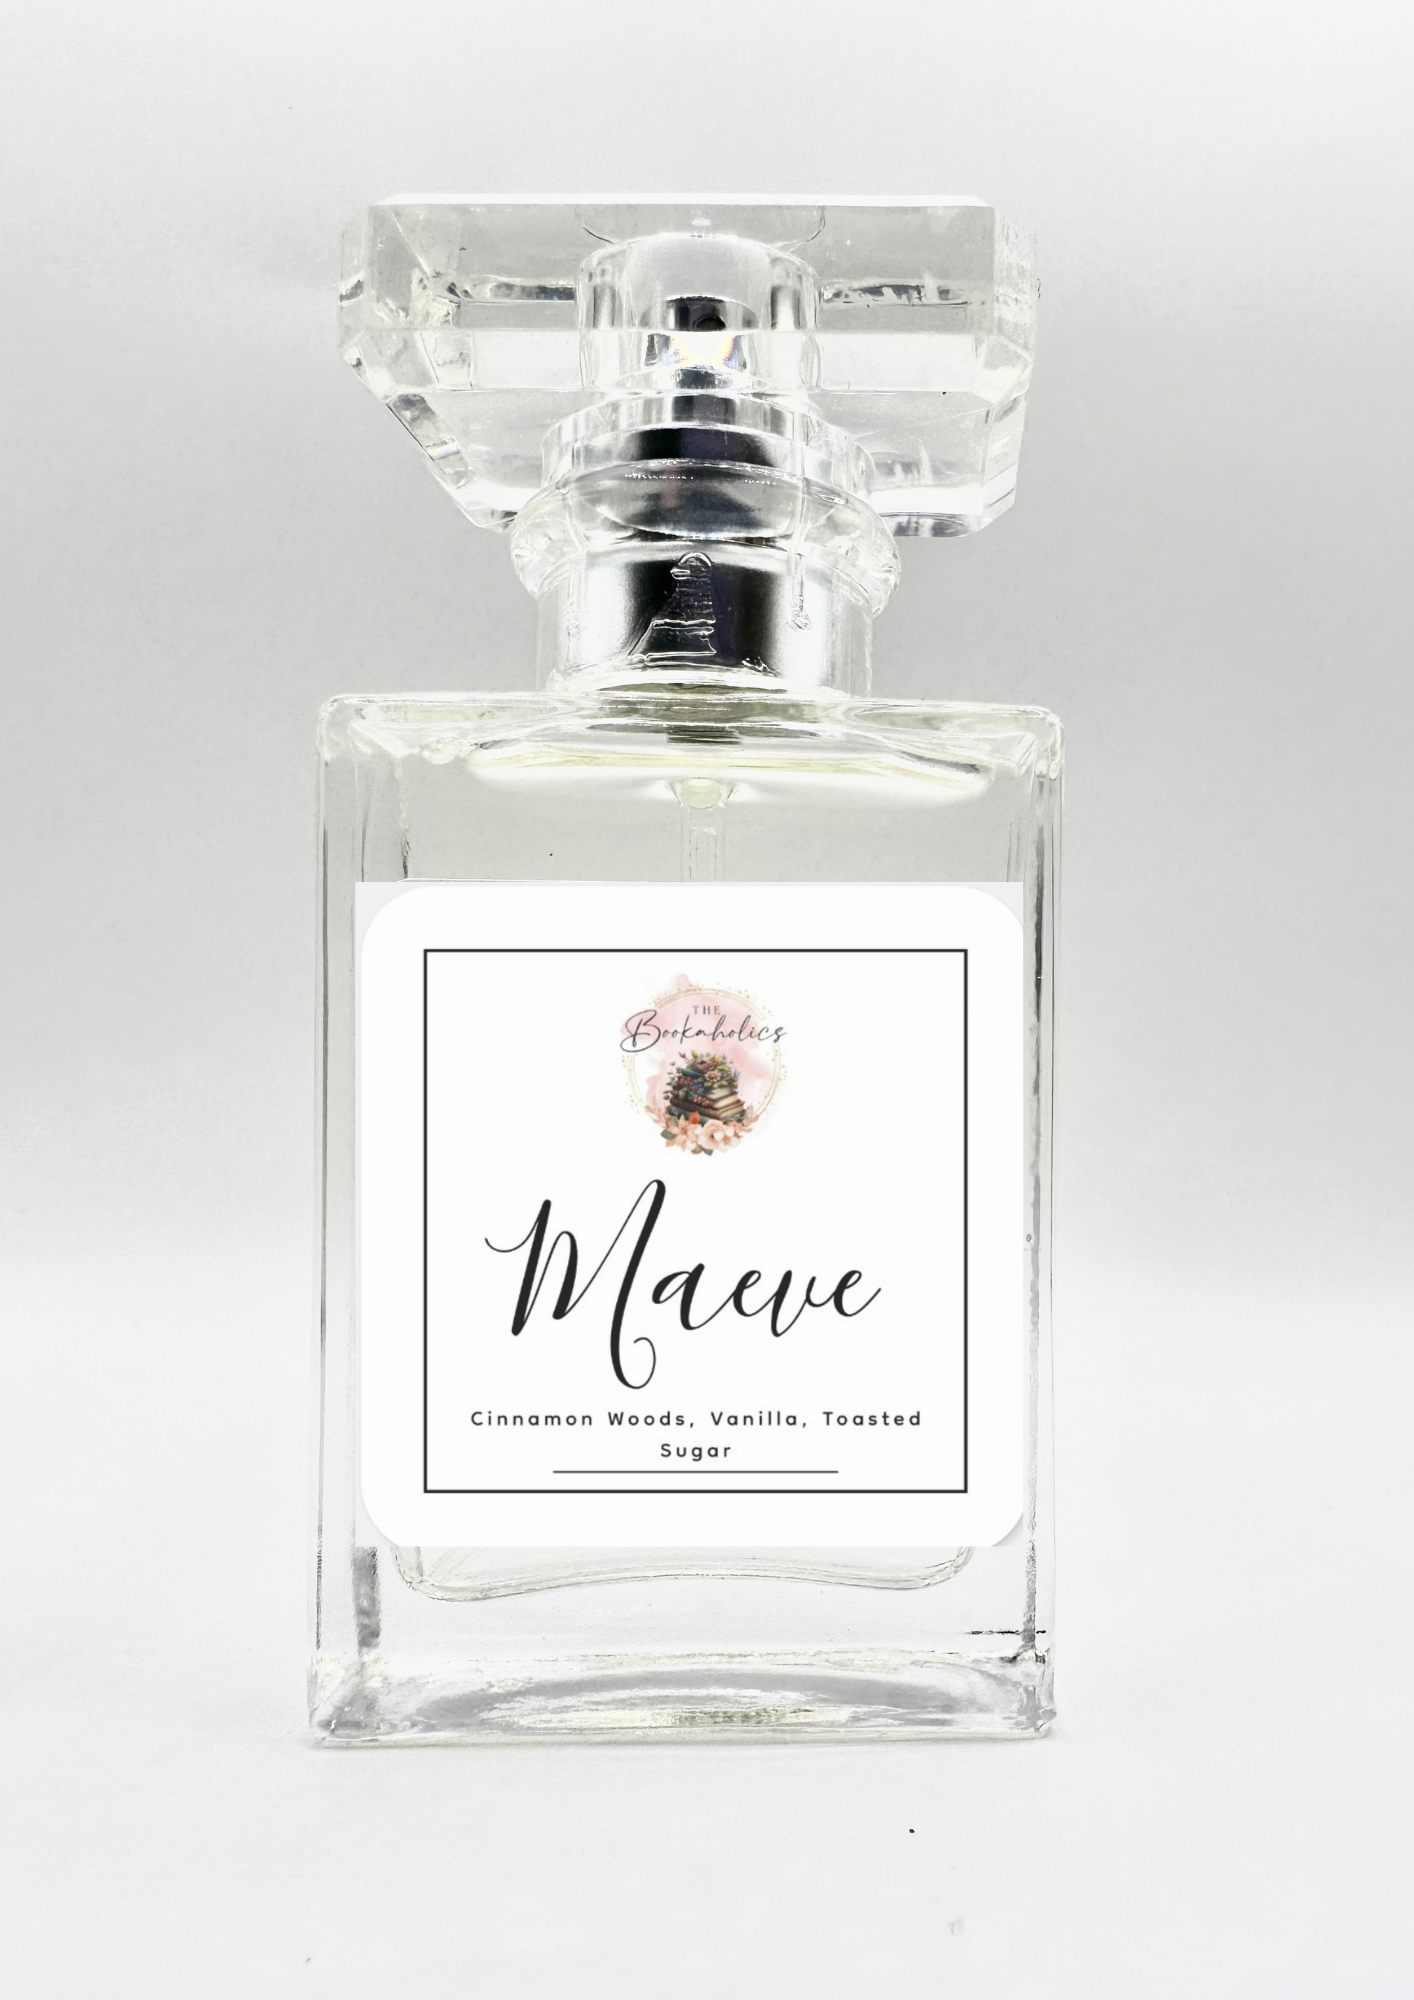 Maeve: Officially Licensed perfume inspired by the Faeven Saga